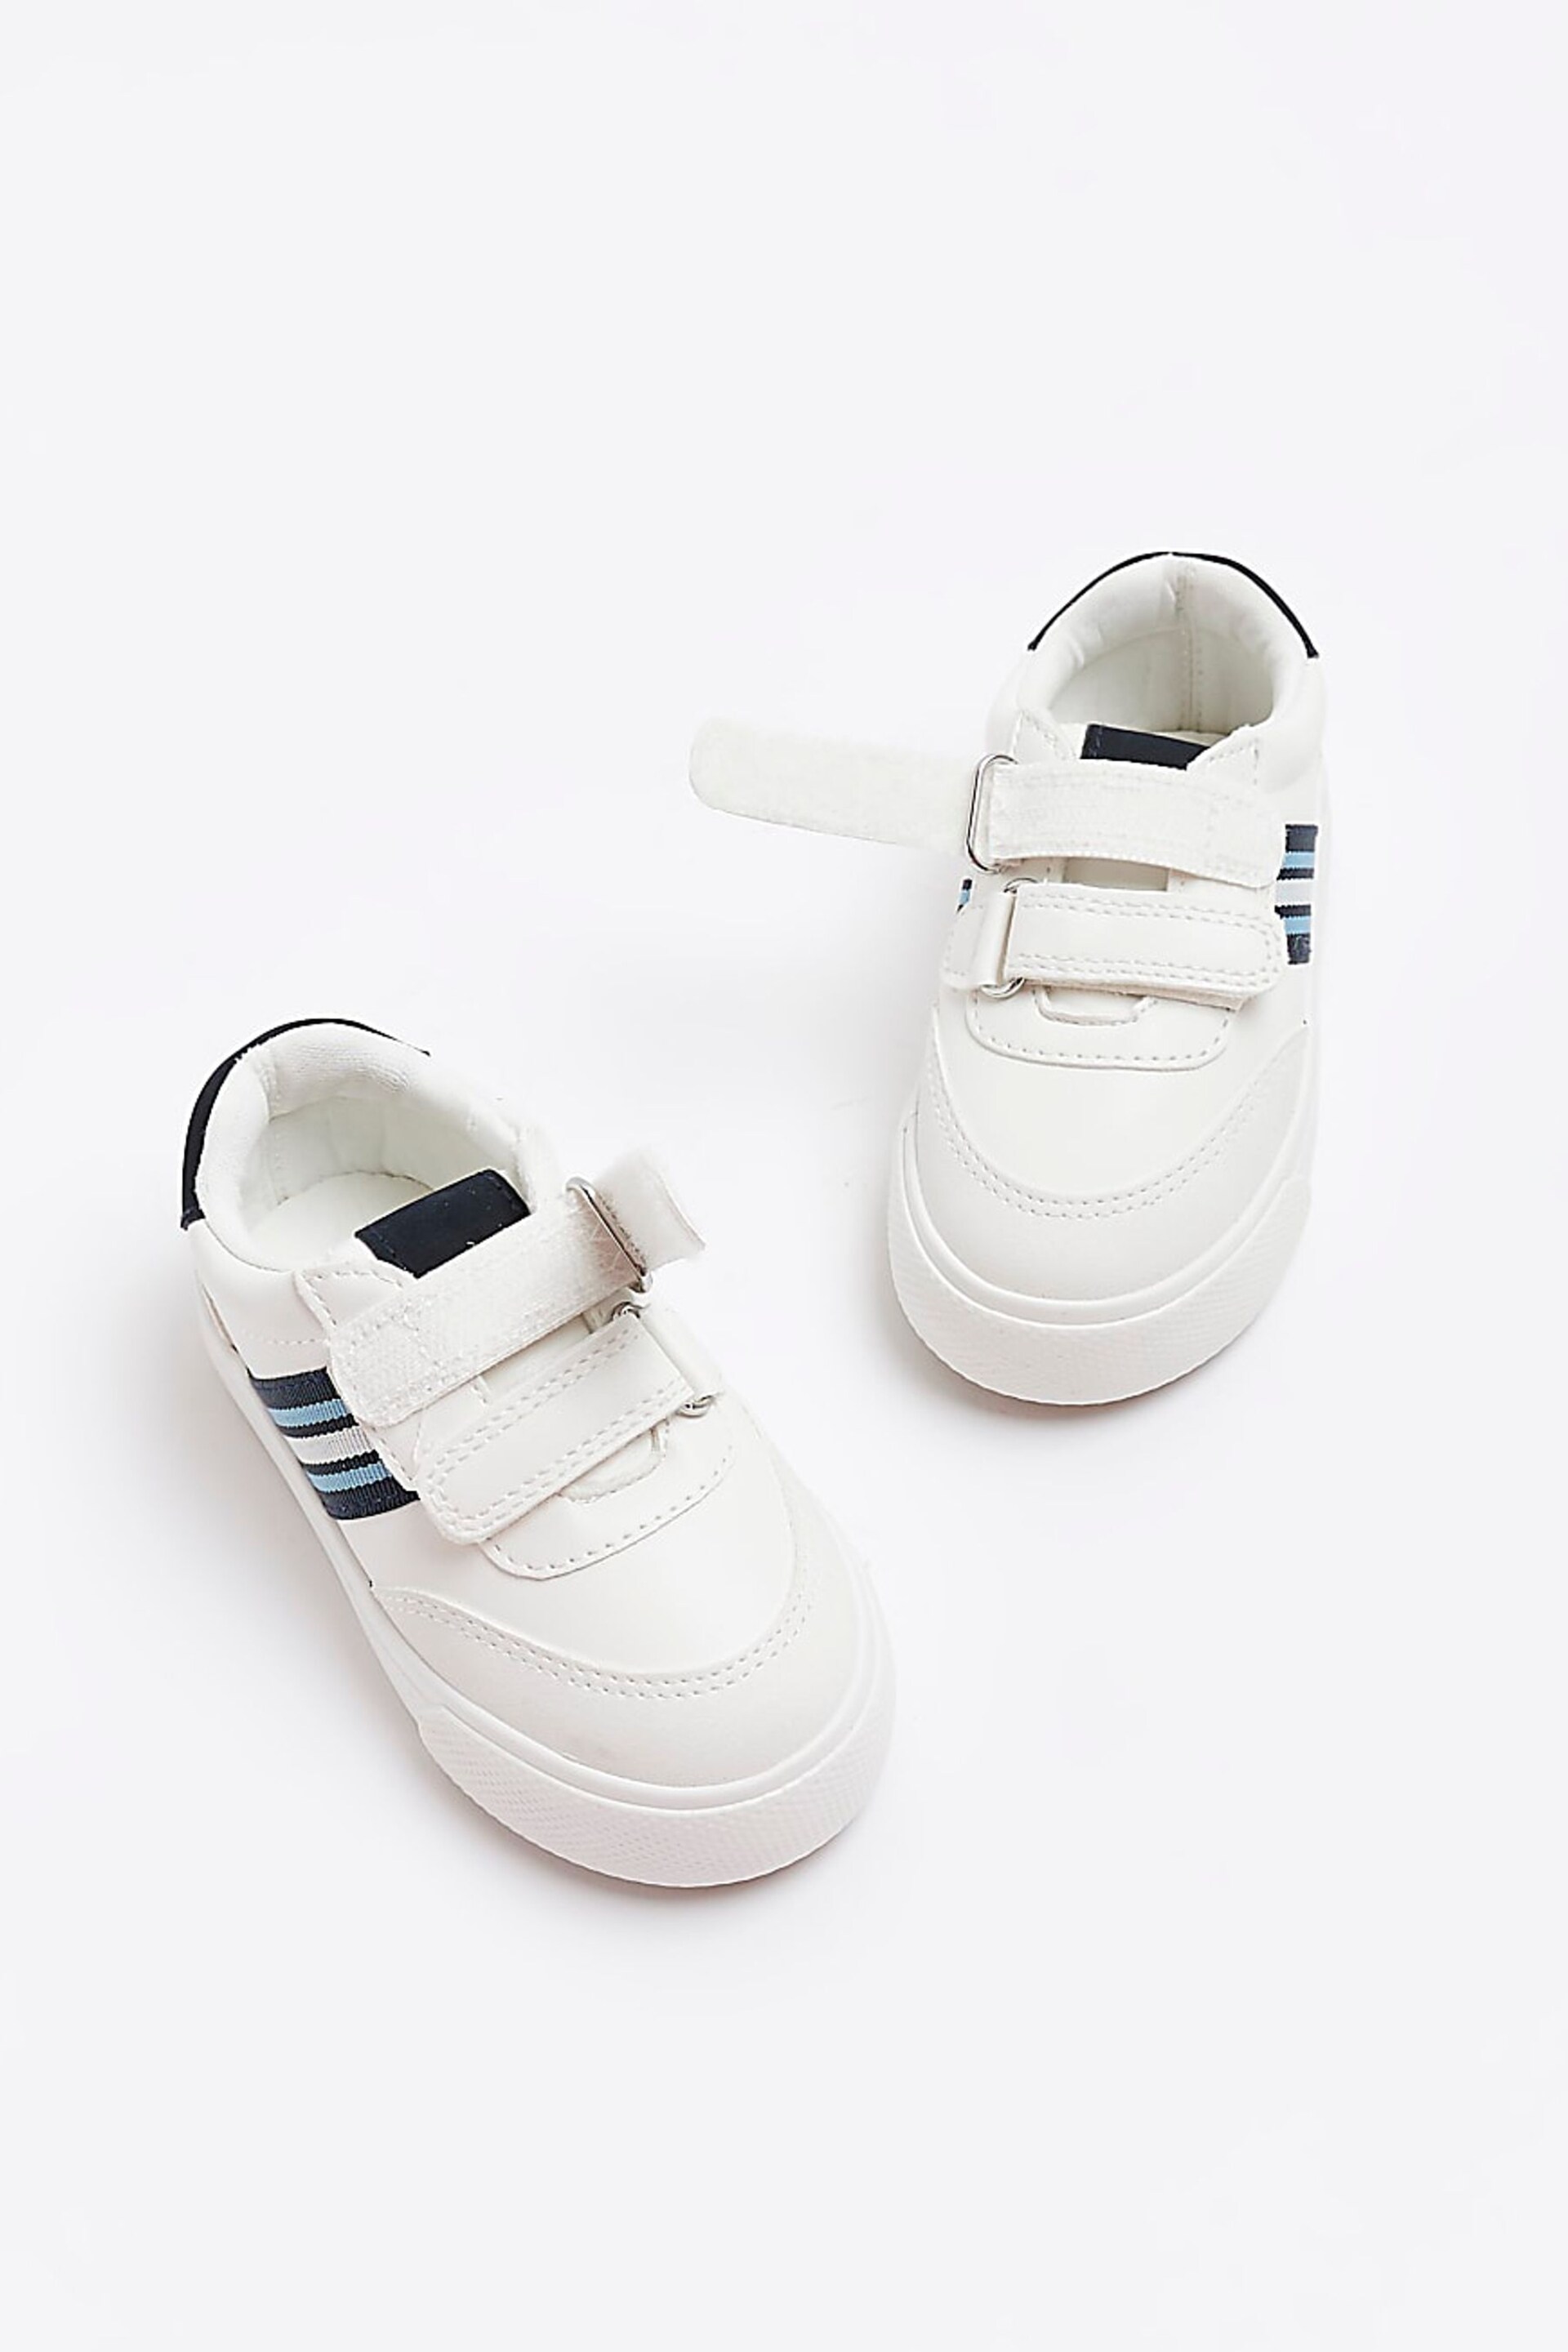 River Island White Boys Striped Plimsole Trainers - Image 3 of 5